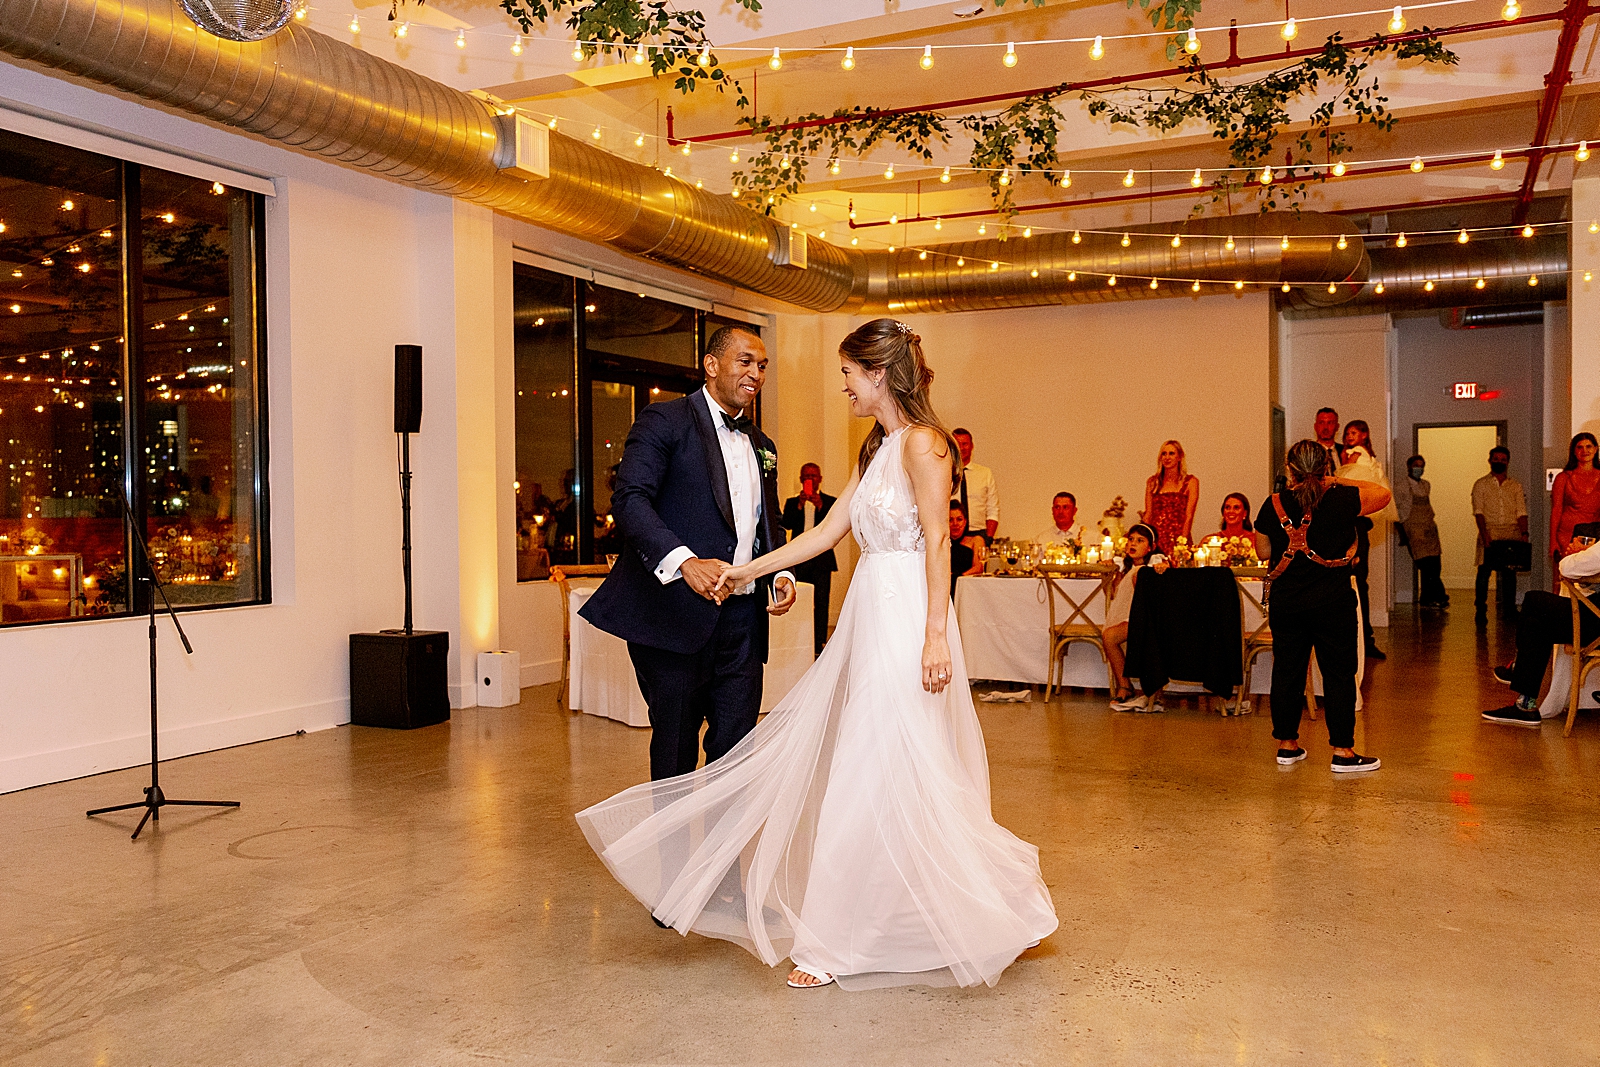 Bride and Groom first dance at Reception